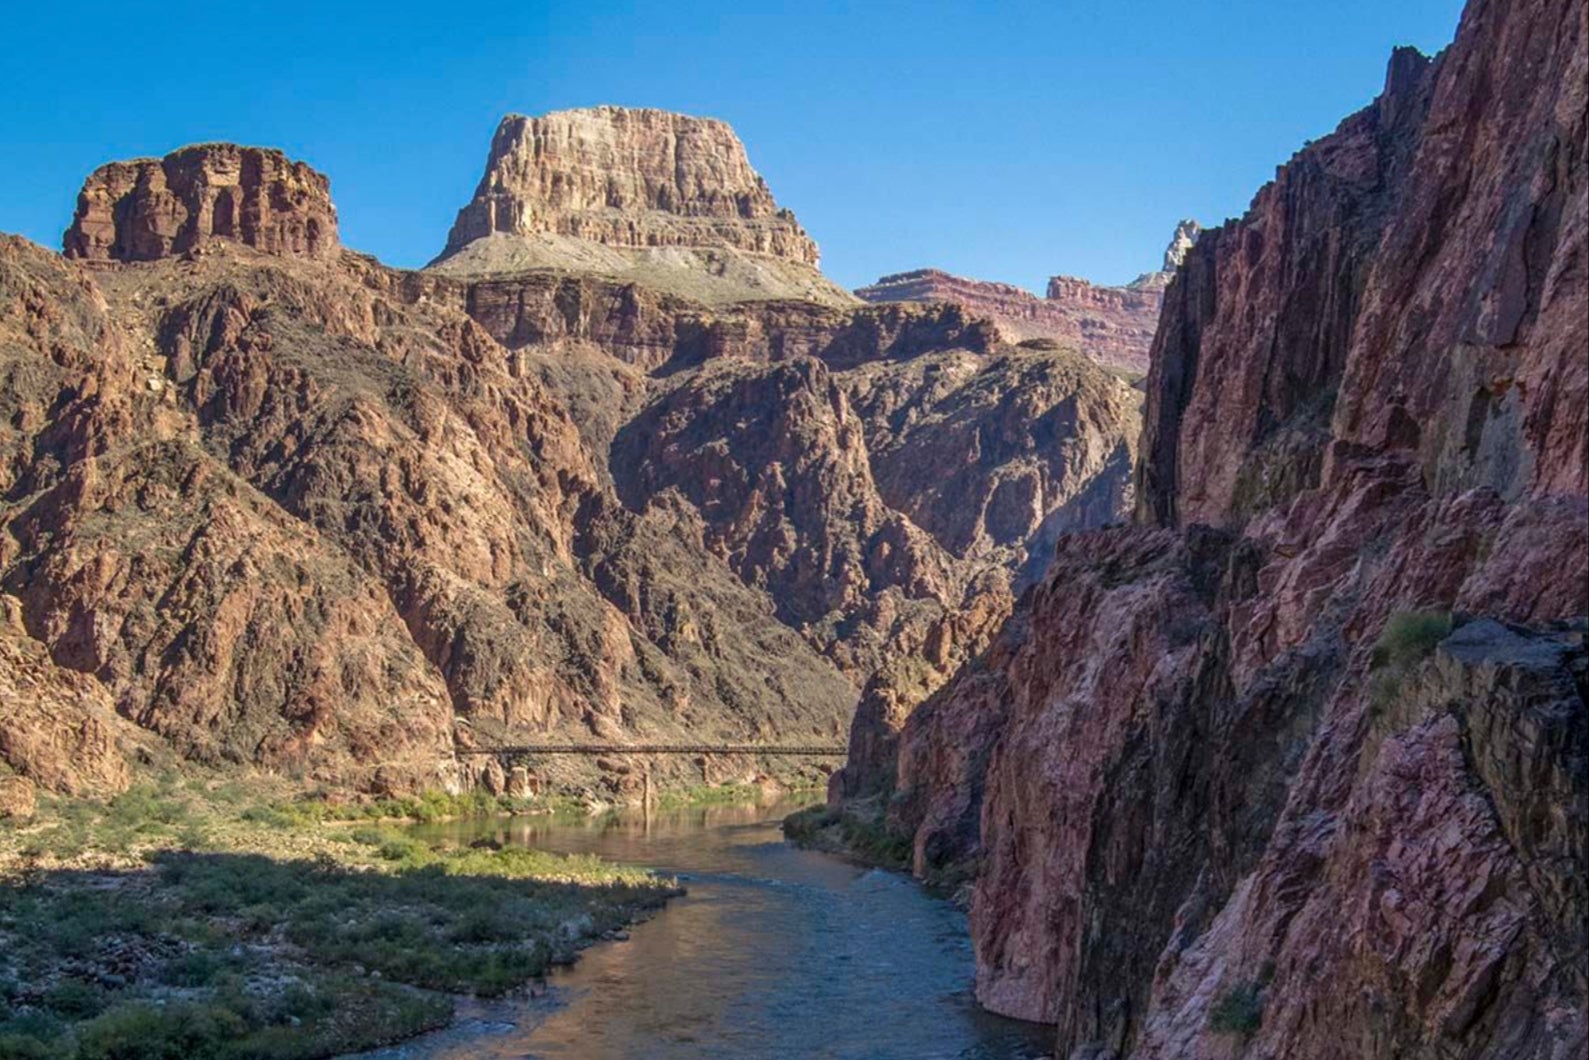 A man has died after hiking on the River Trail, near to Phantom Ranch in the Grand Canyon, where exposed areas can reach up to 120F in the shade